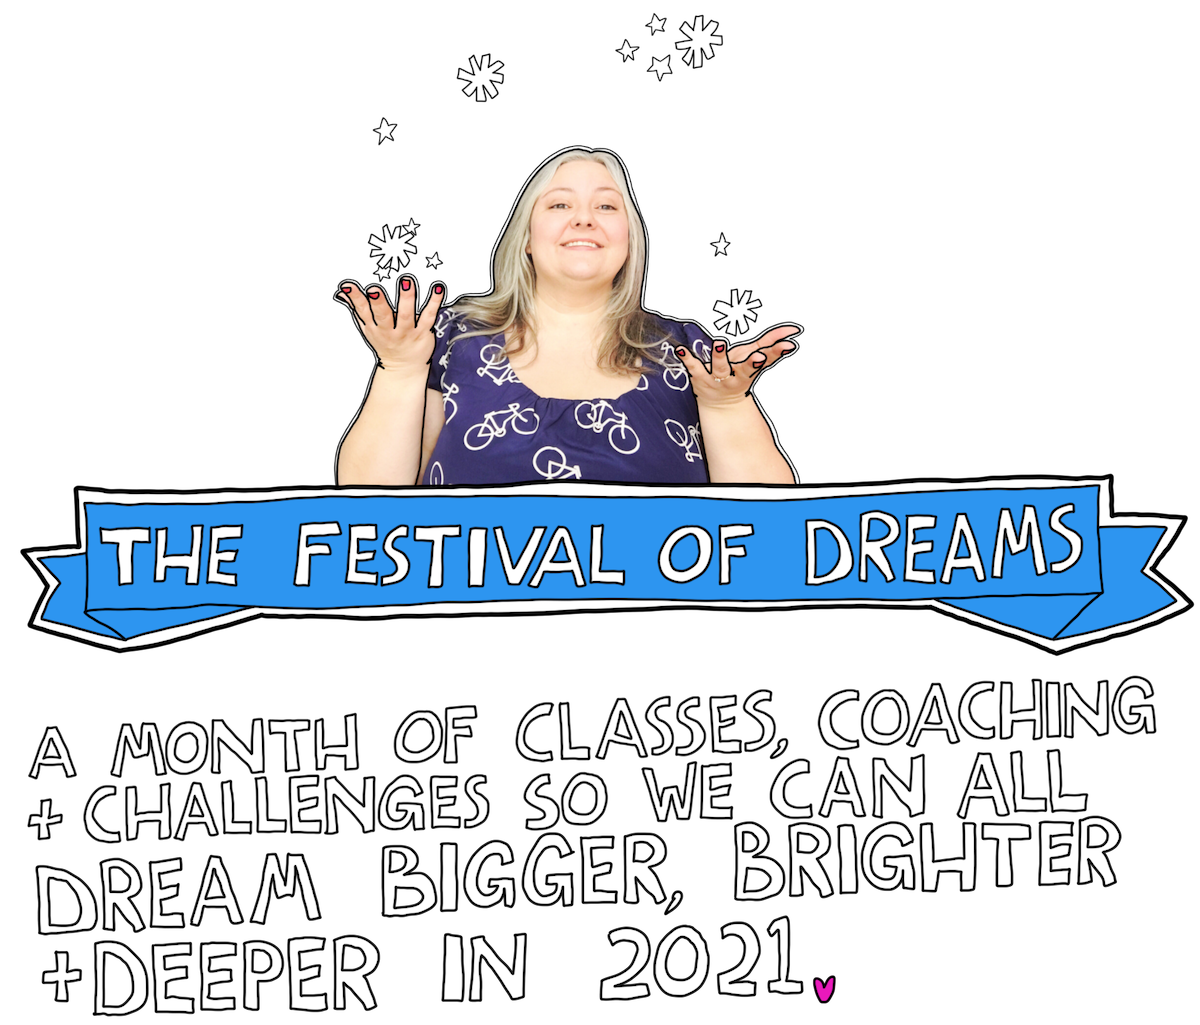 Festival of Dreams. A month of classes, coaching and challenges so we can all dream bigger, brighter and deeper in 2021